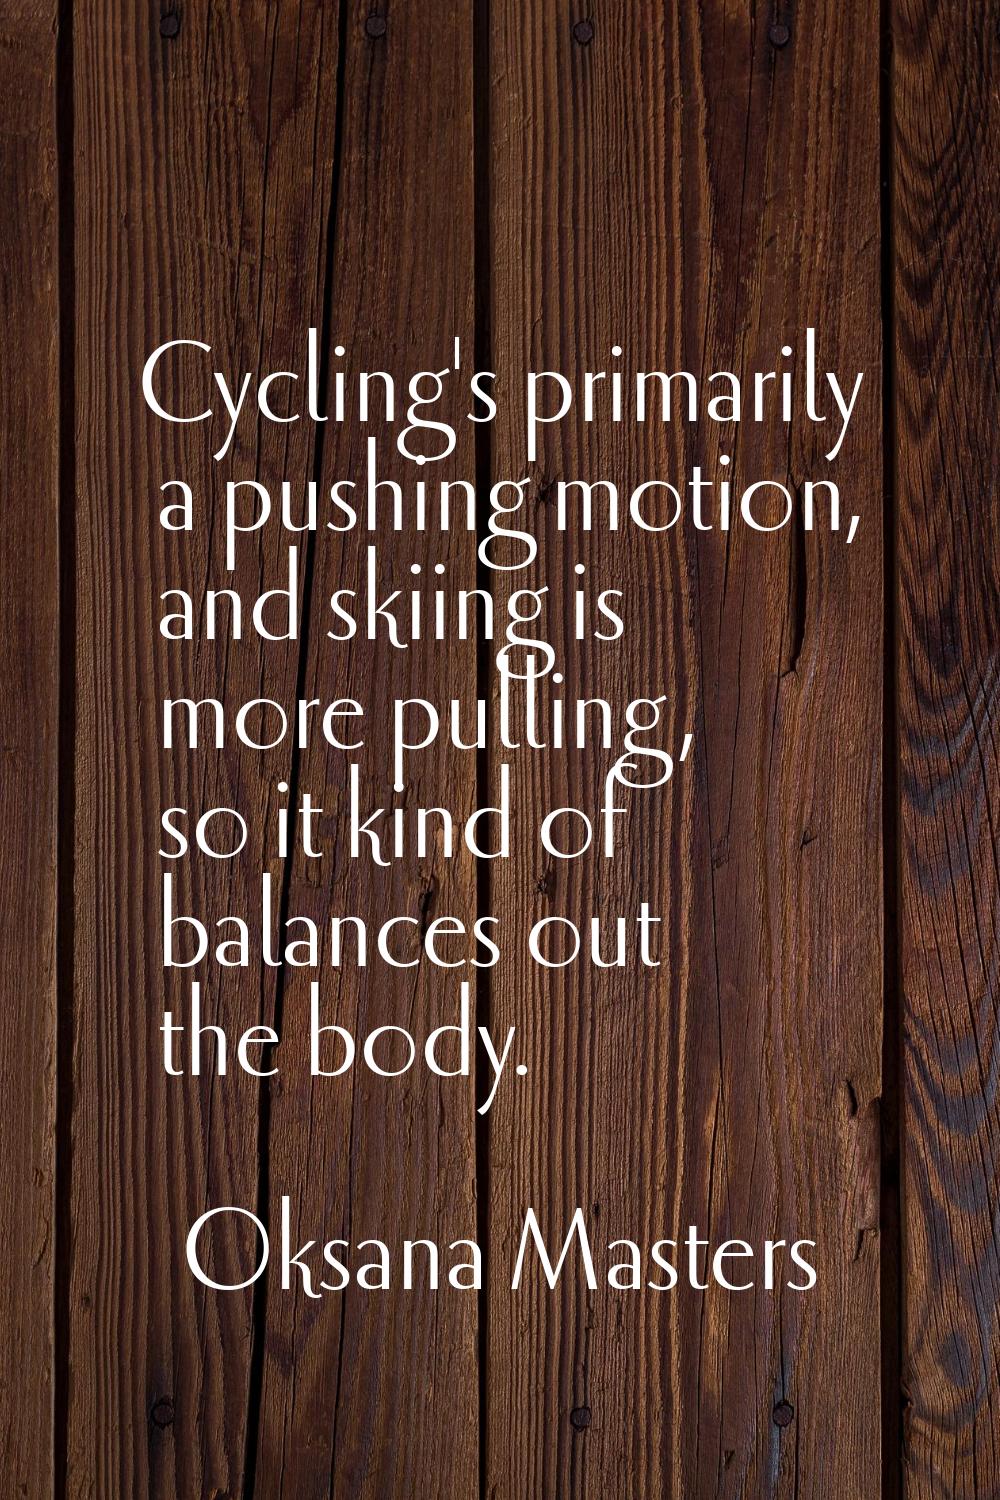 Cycling's primarily a pushing motion, and skiing is more pulling, so it kind of balances out the bo